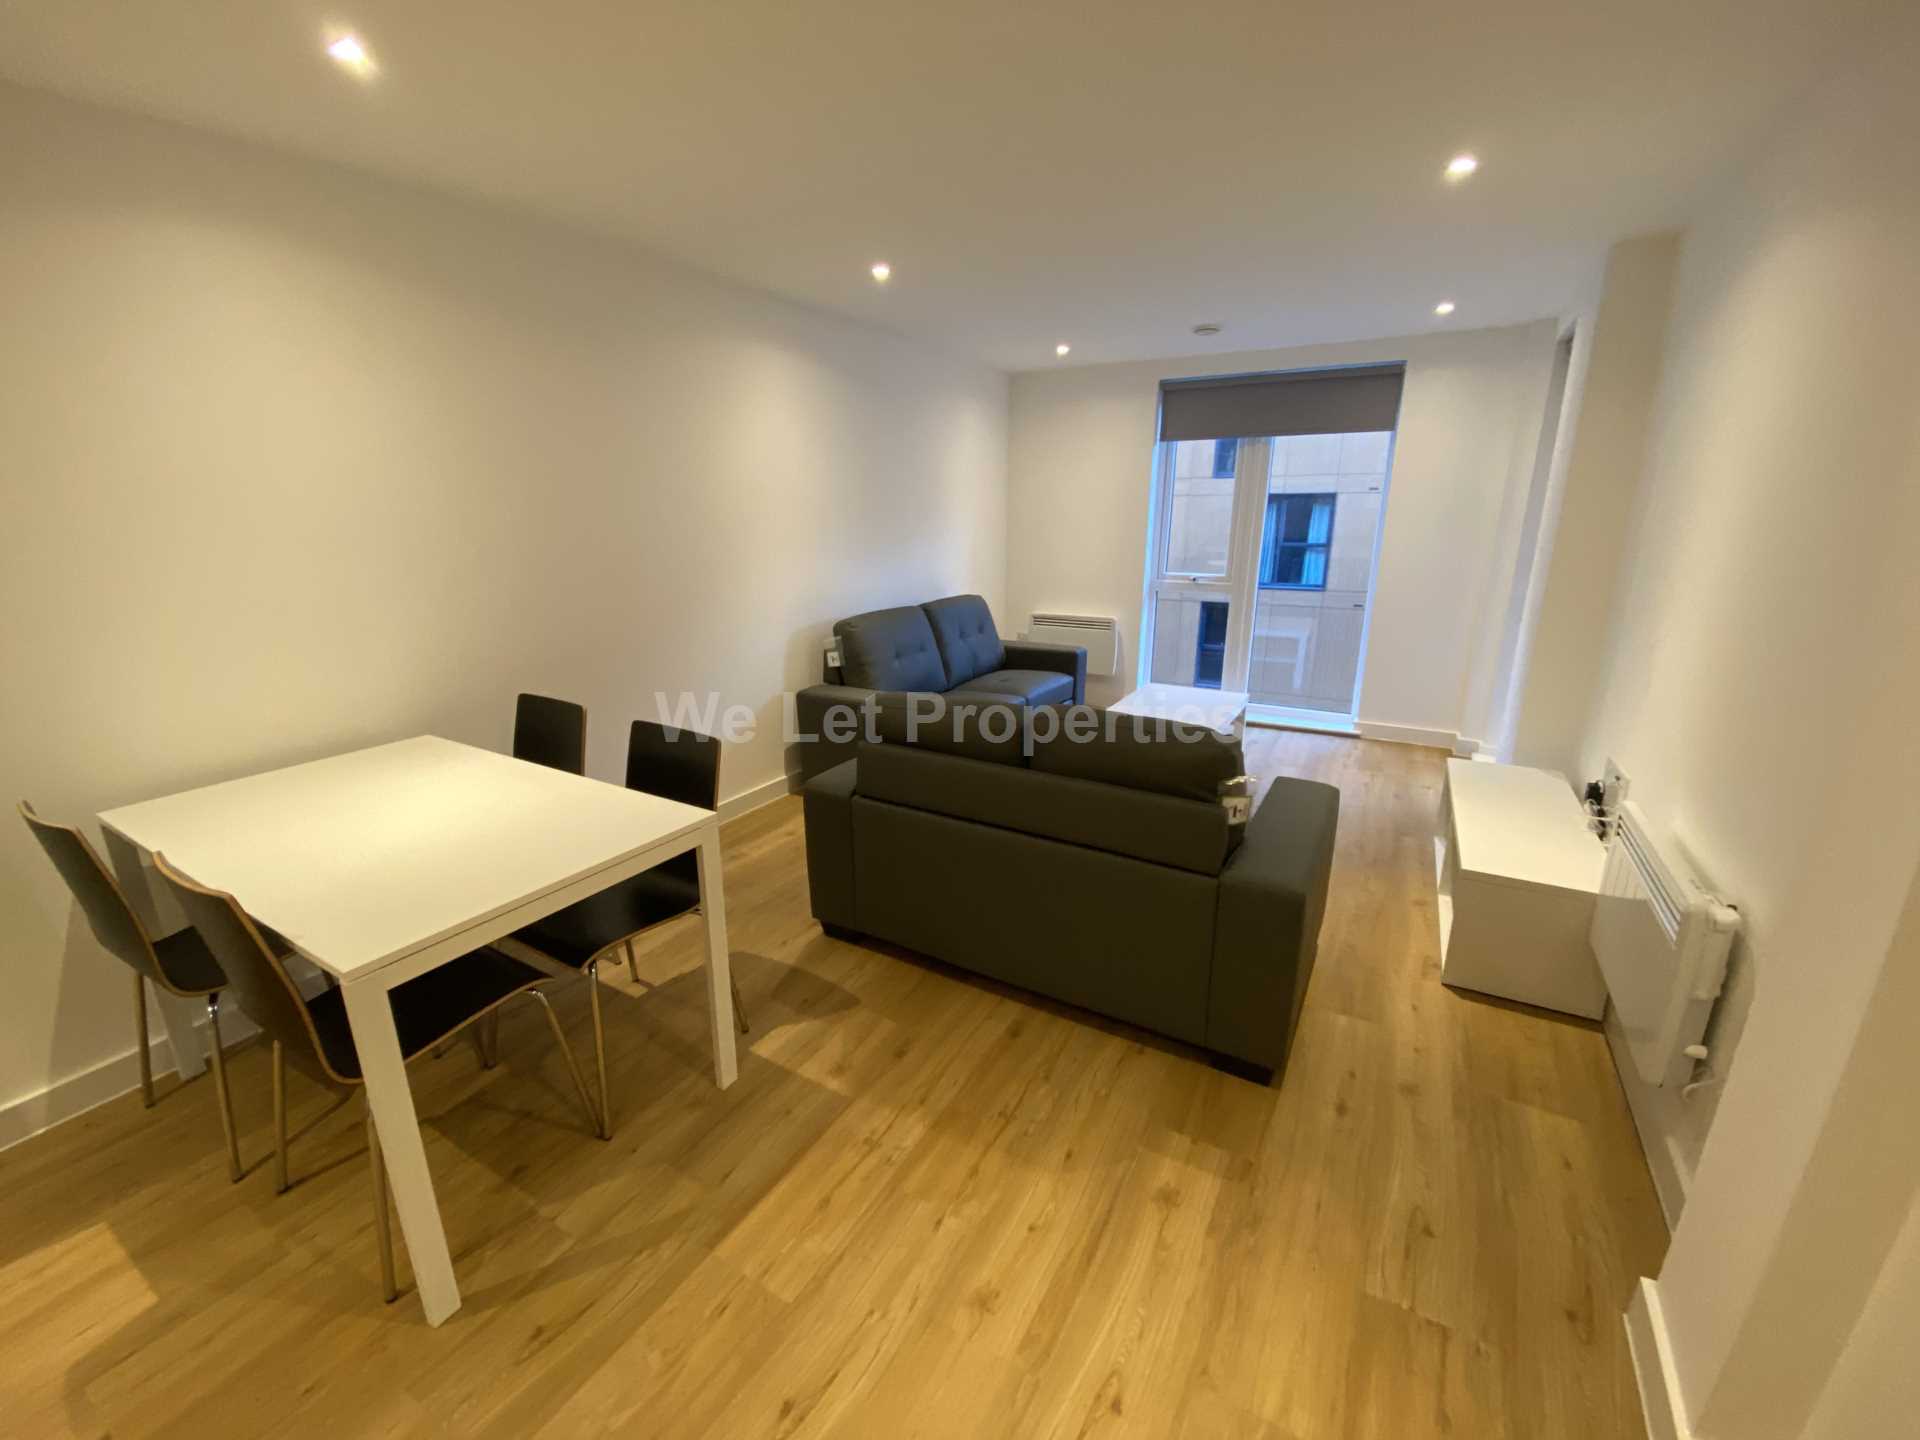 3 bed Apartment for rent in Manchester. From We Let Properties - Manchester